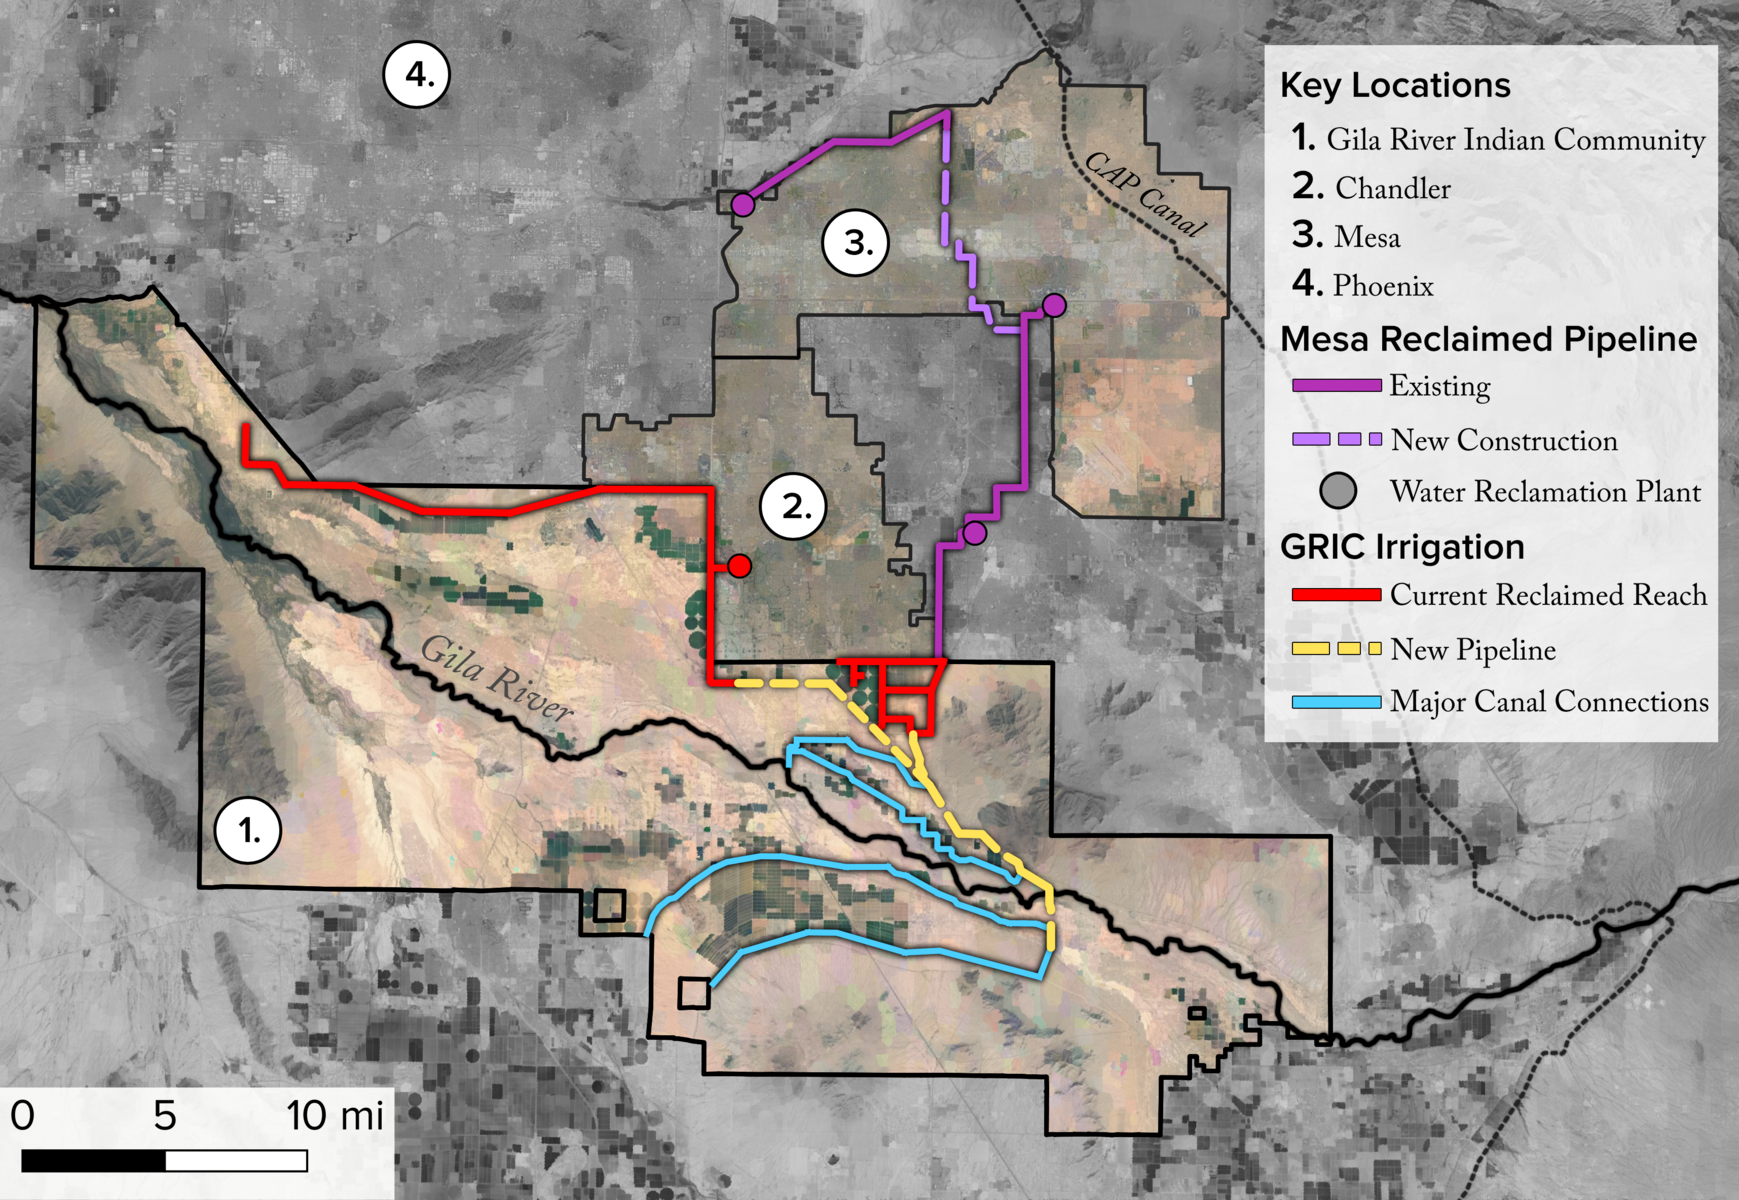 This map shows the current and future water exchanges between GRIC and Chandler and Mesa. 